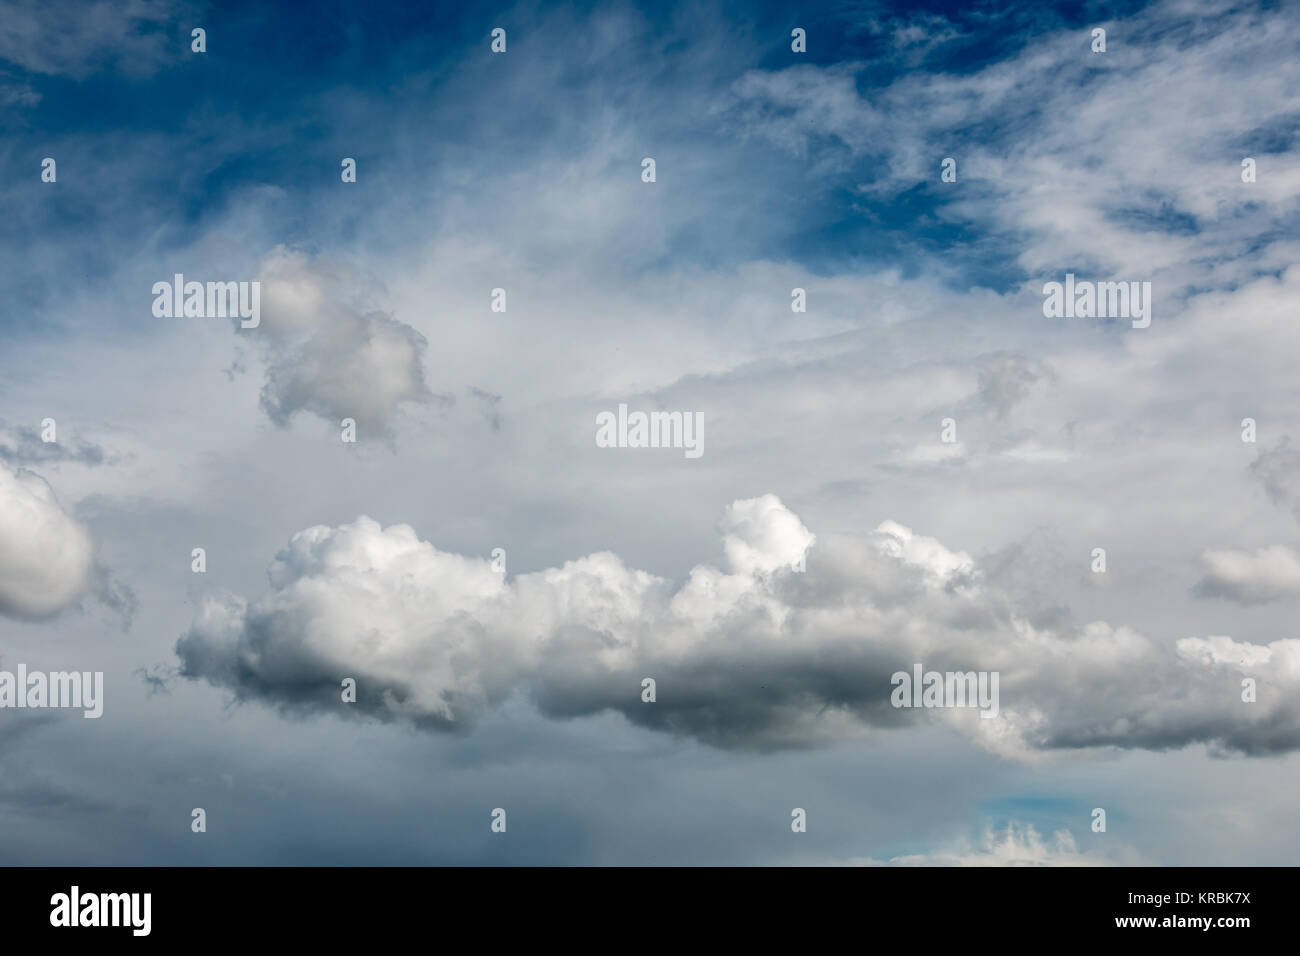 Dramatic blue sky and white and gray clouds Stock Photo